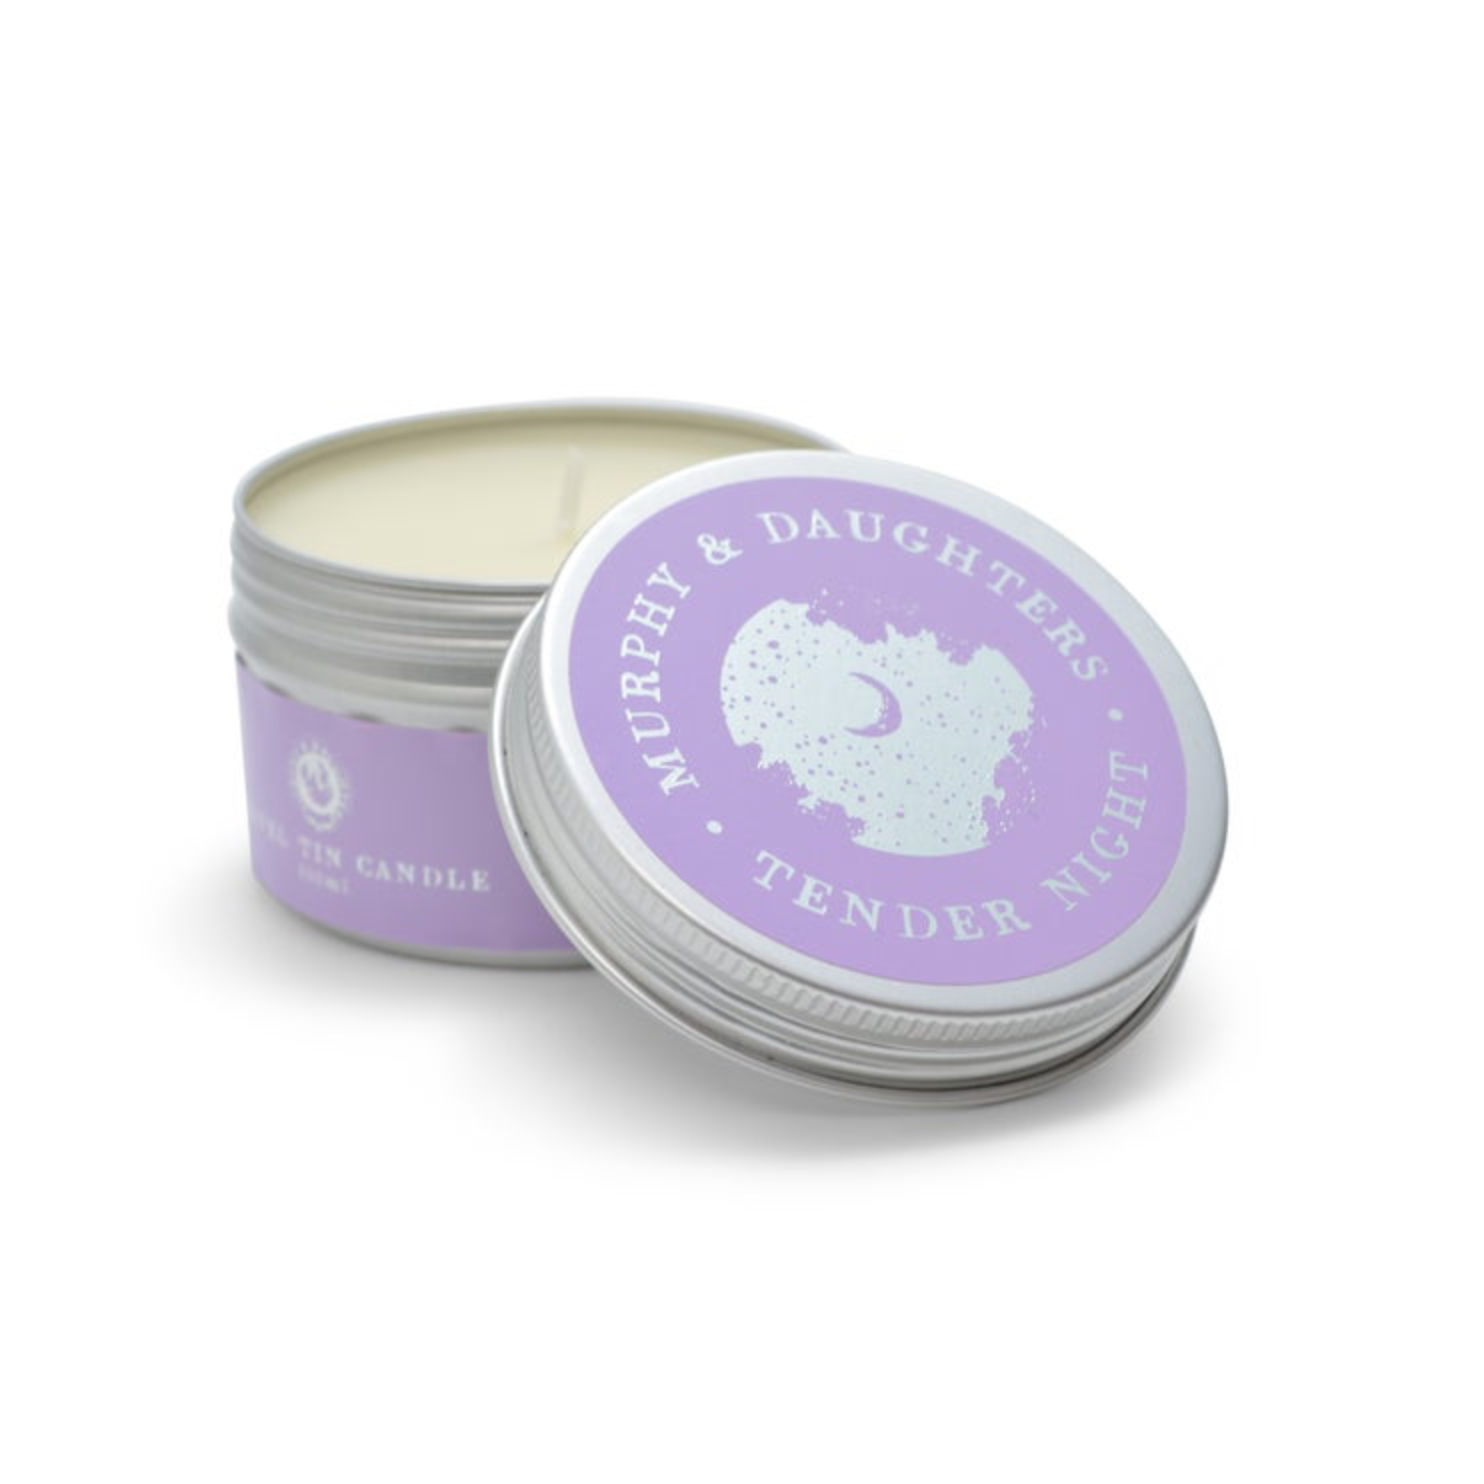 MURPHY & DAUGHTERS Candle - Travel Tin - Tender Night